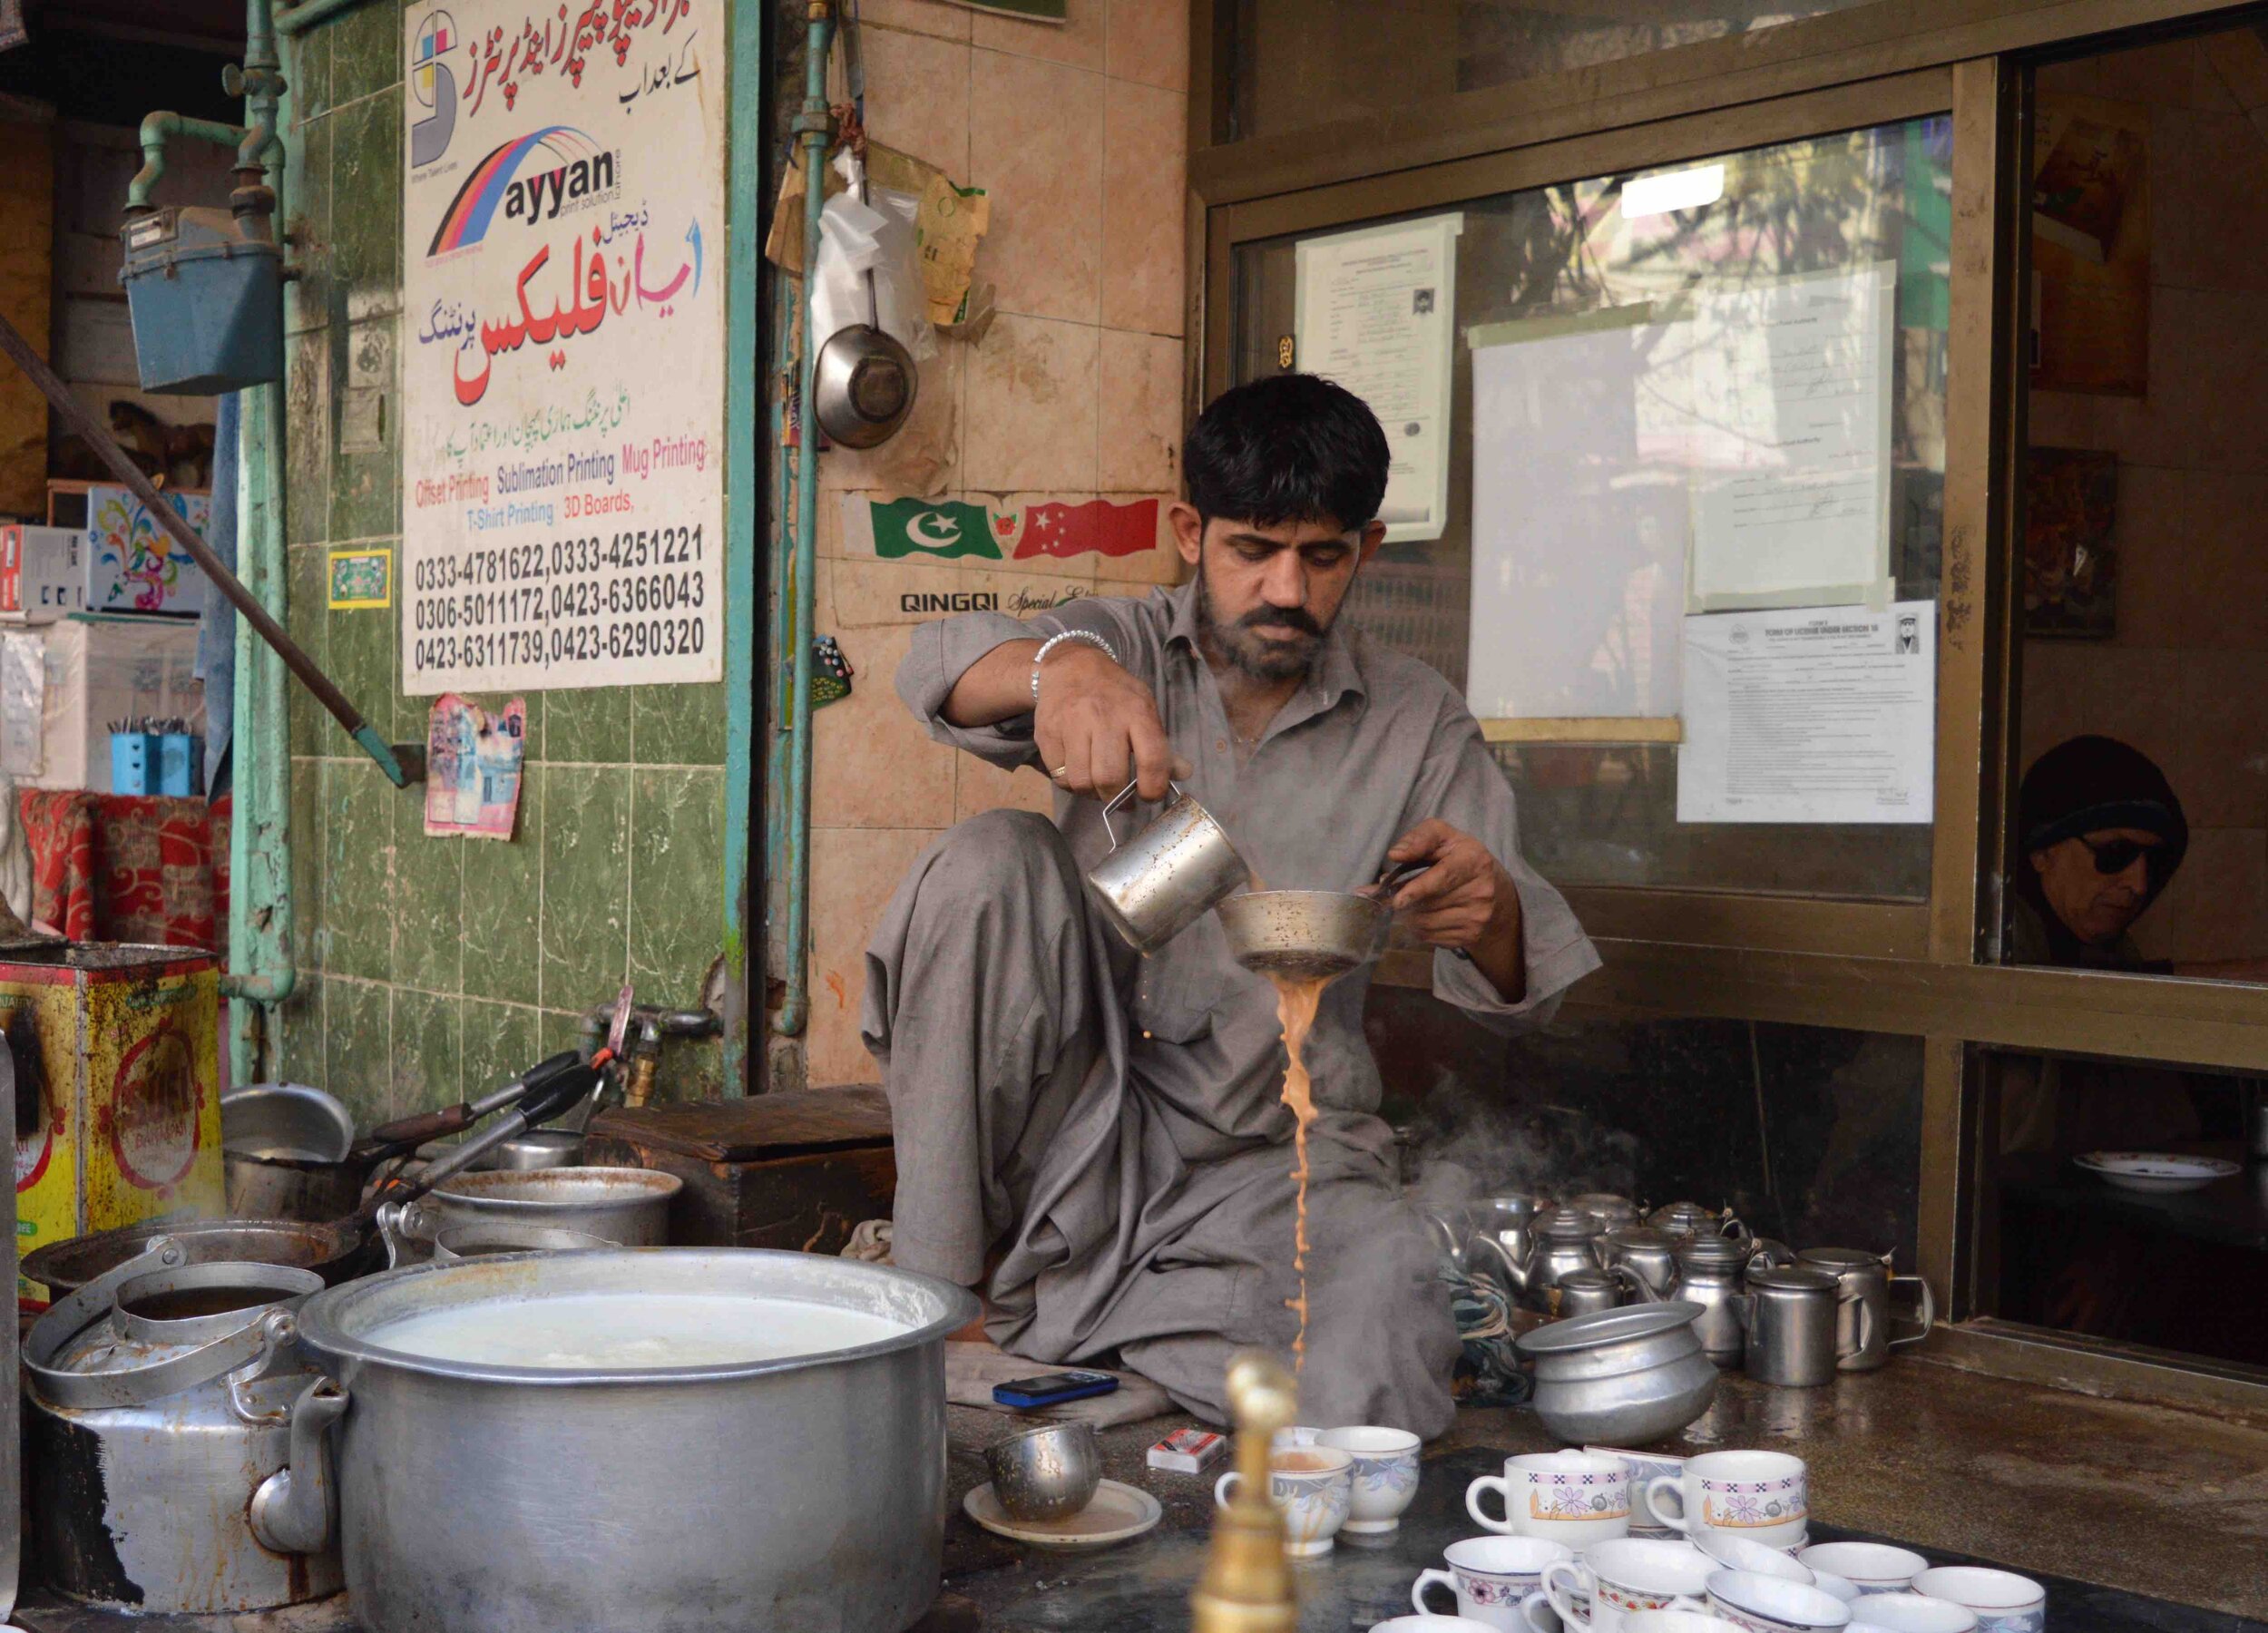 A Walk Through the Walled City of Old Lahore | Goya Journal